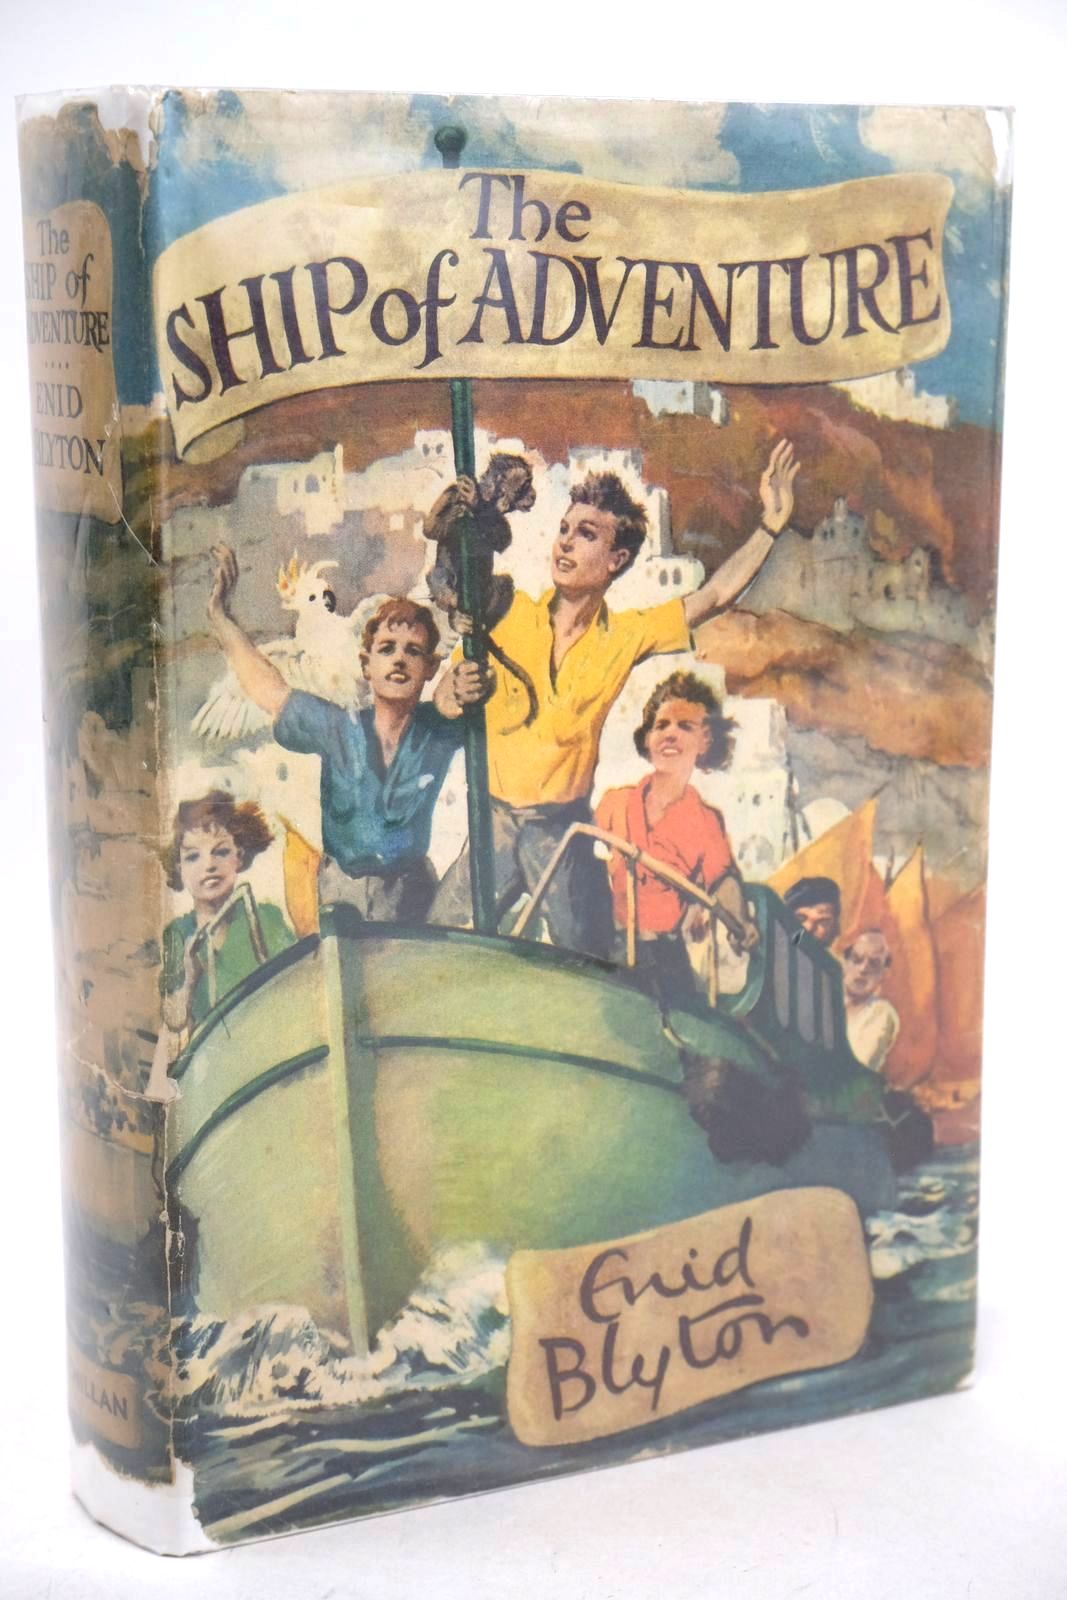 Photo of THE SHIP OF ADVENTURE written by Blyton, Enid illustrated by Tresilian, Stuart published by Macmillan &amp; Co. Ltd. (STOCK CODE: 1326711)  for sale by Stella & Rose's Books